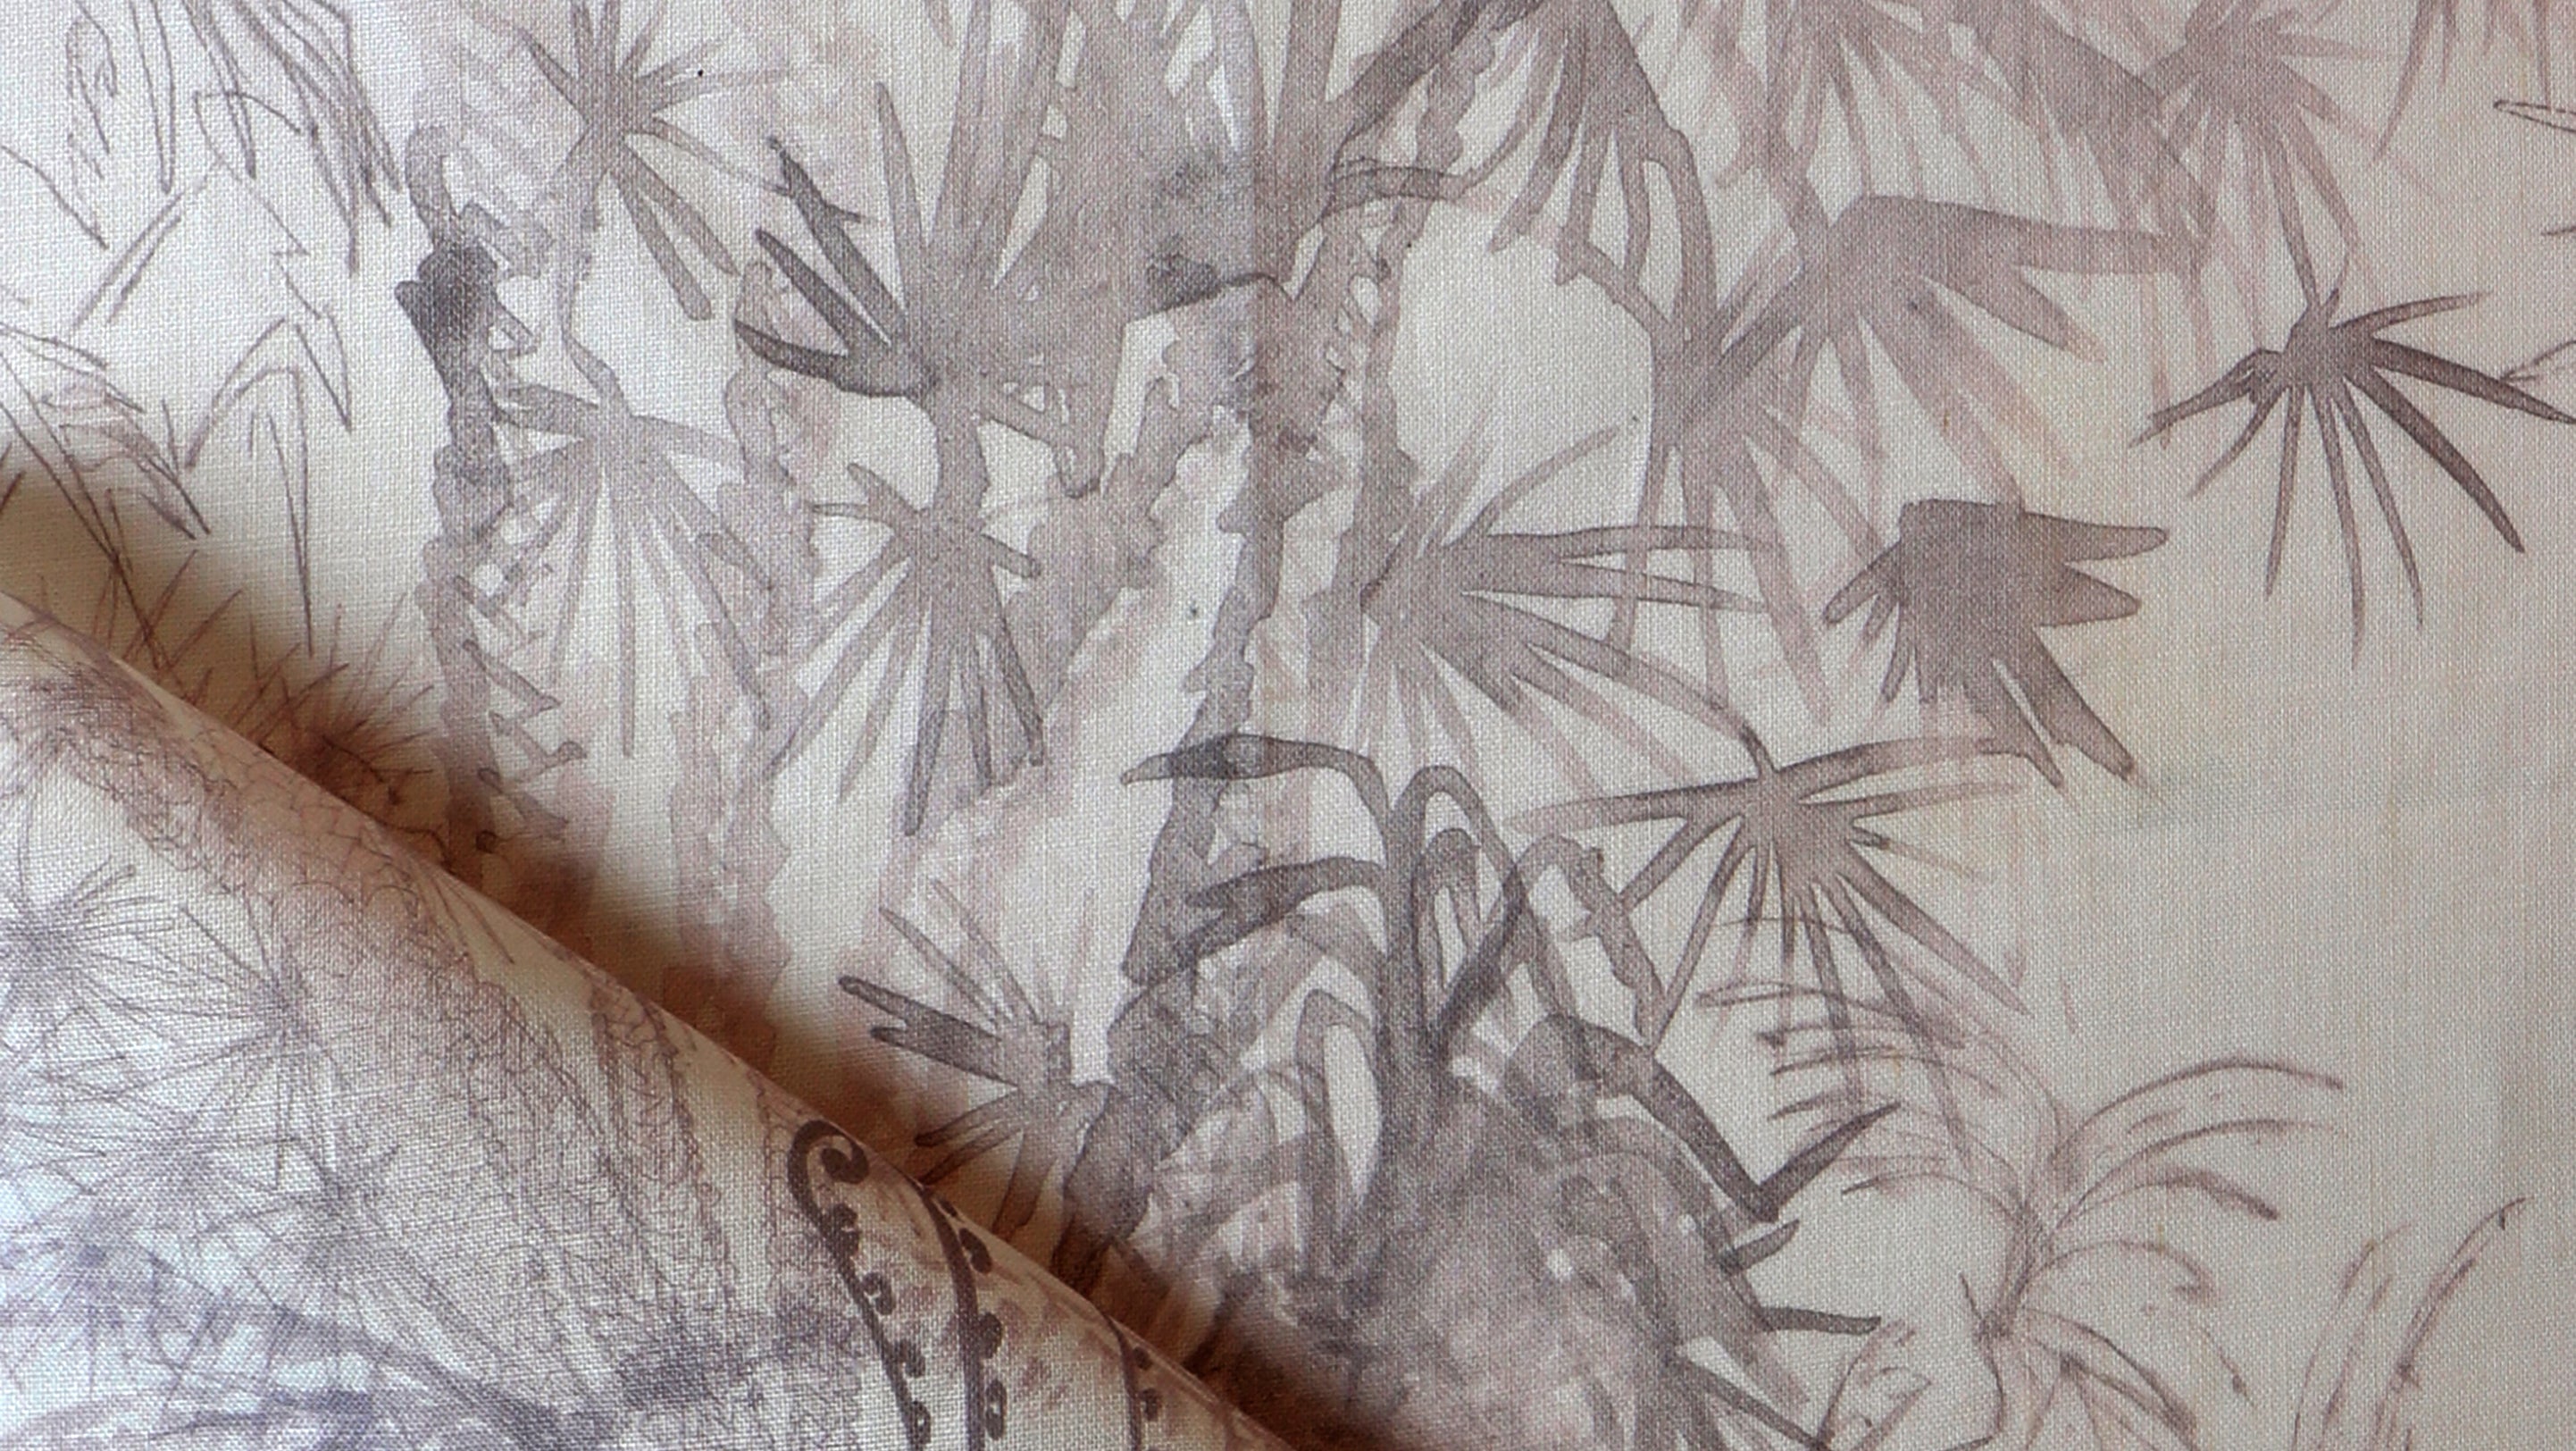 A close up of a drawing of a bamboo tree